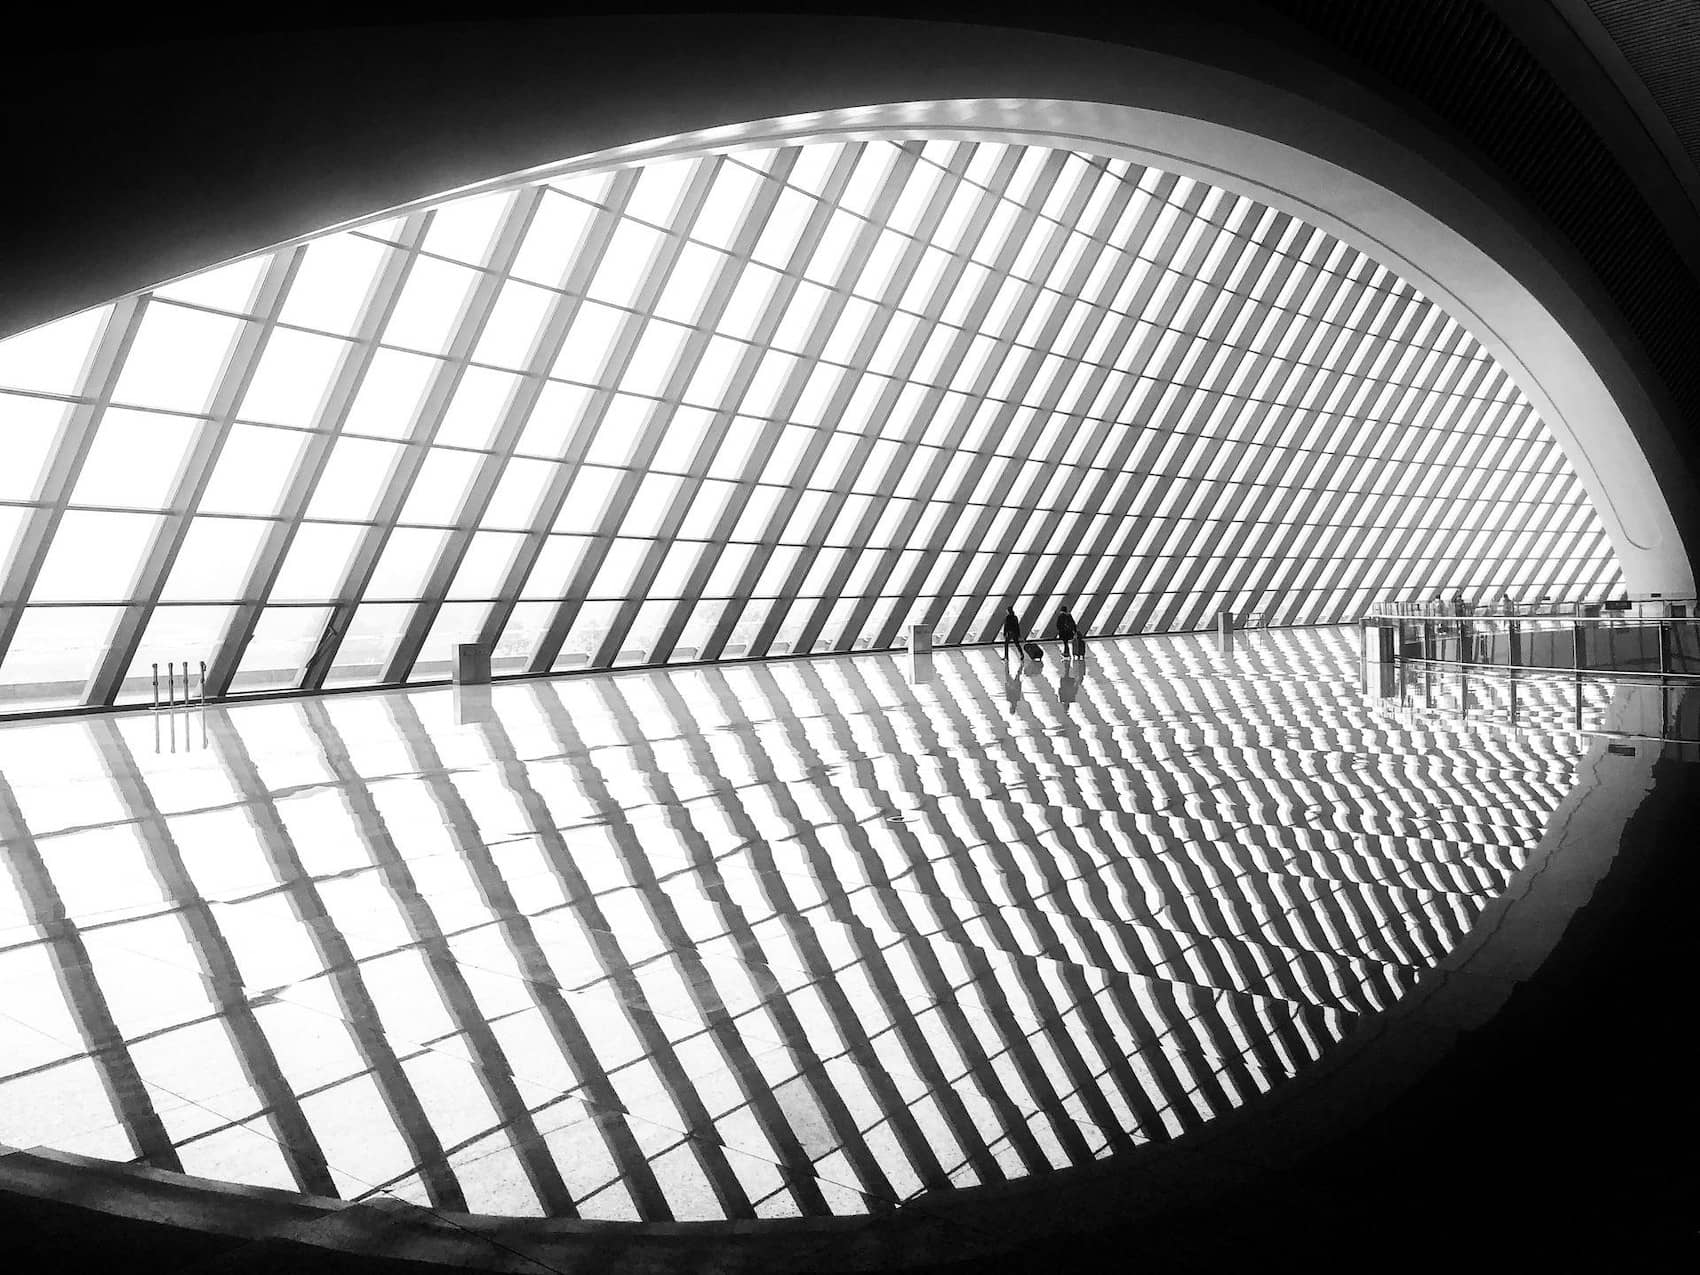 Black and White Architecture Photography - Interior Museum